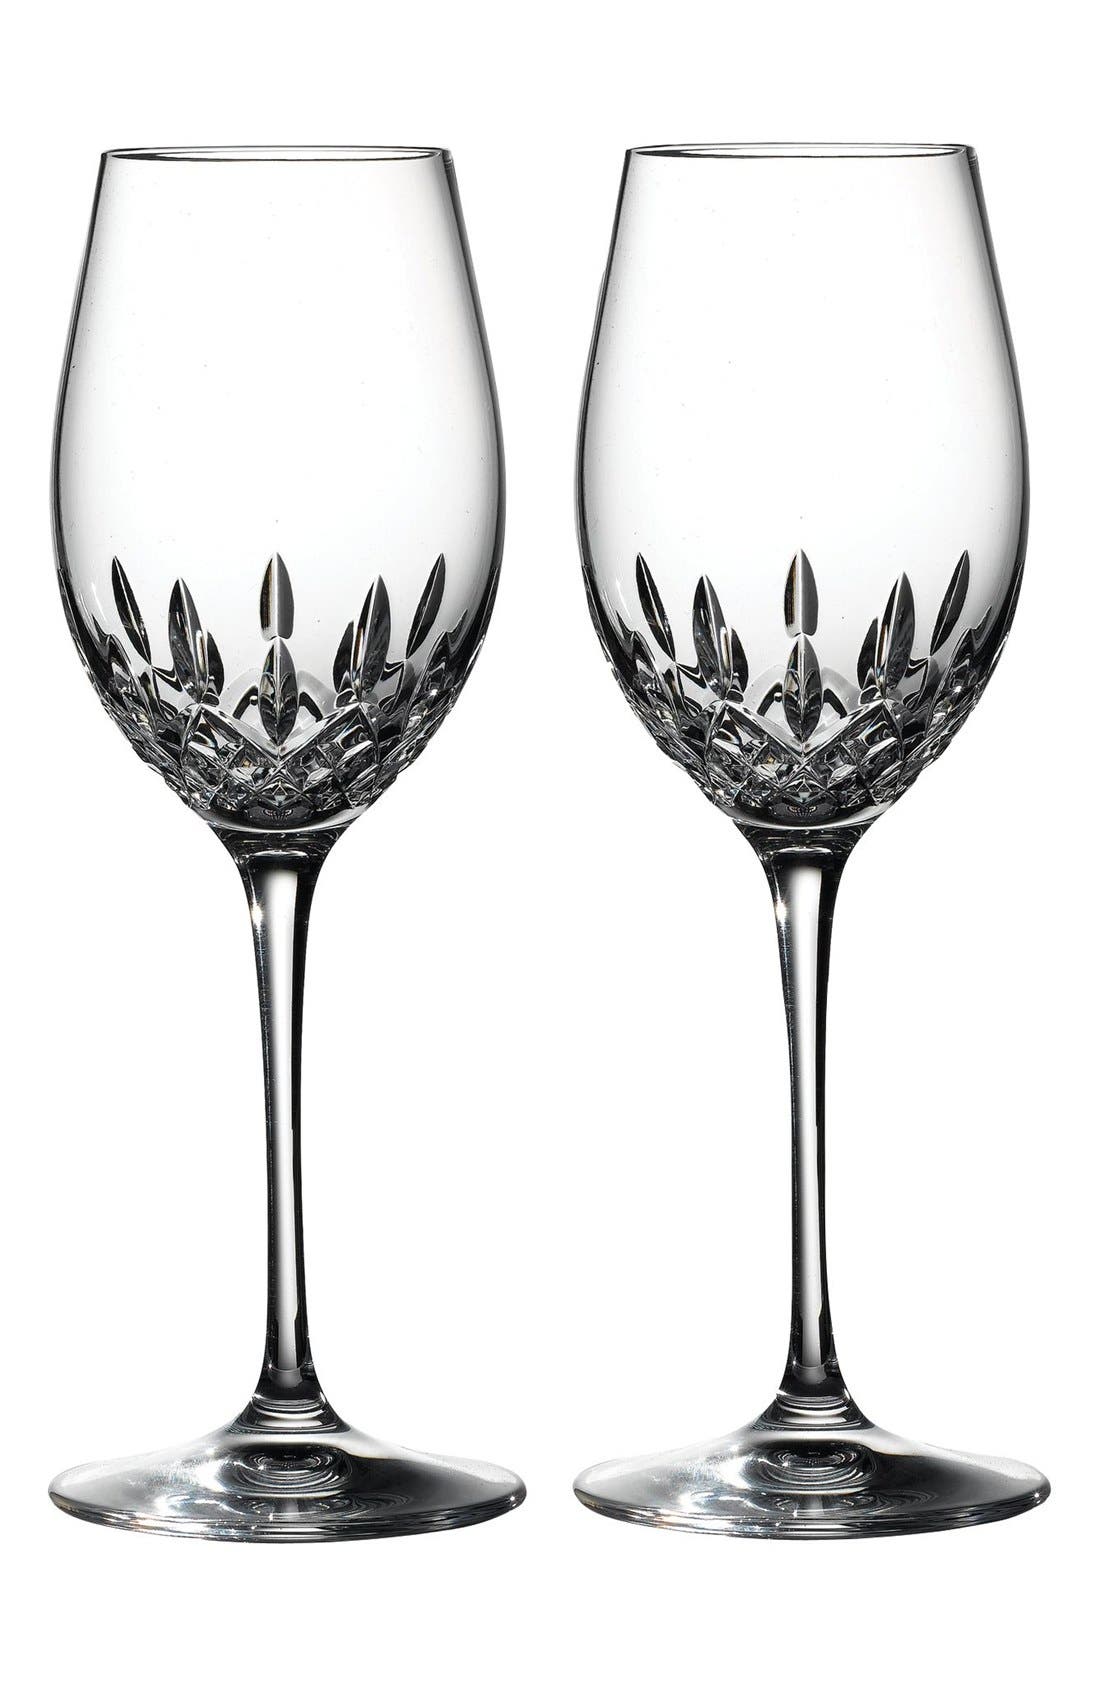 Waterford Crystal Lismore Essence Wine Glass Set of 2 